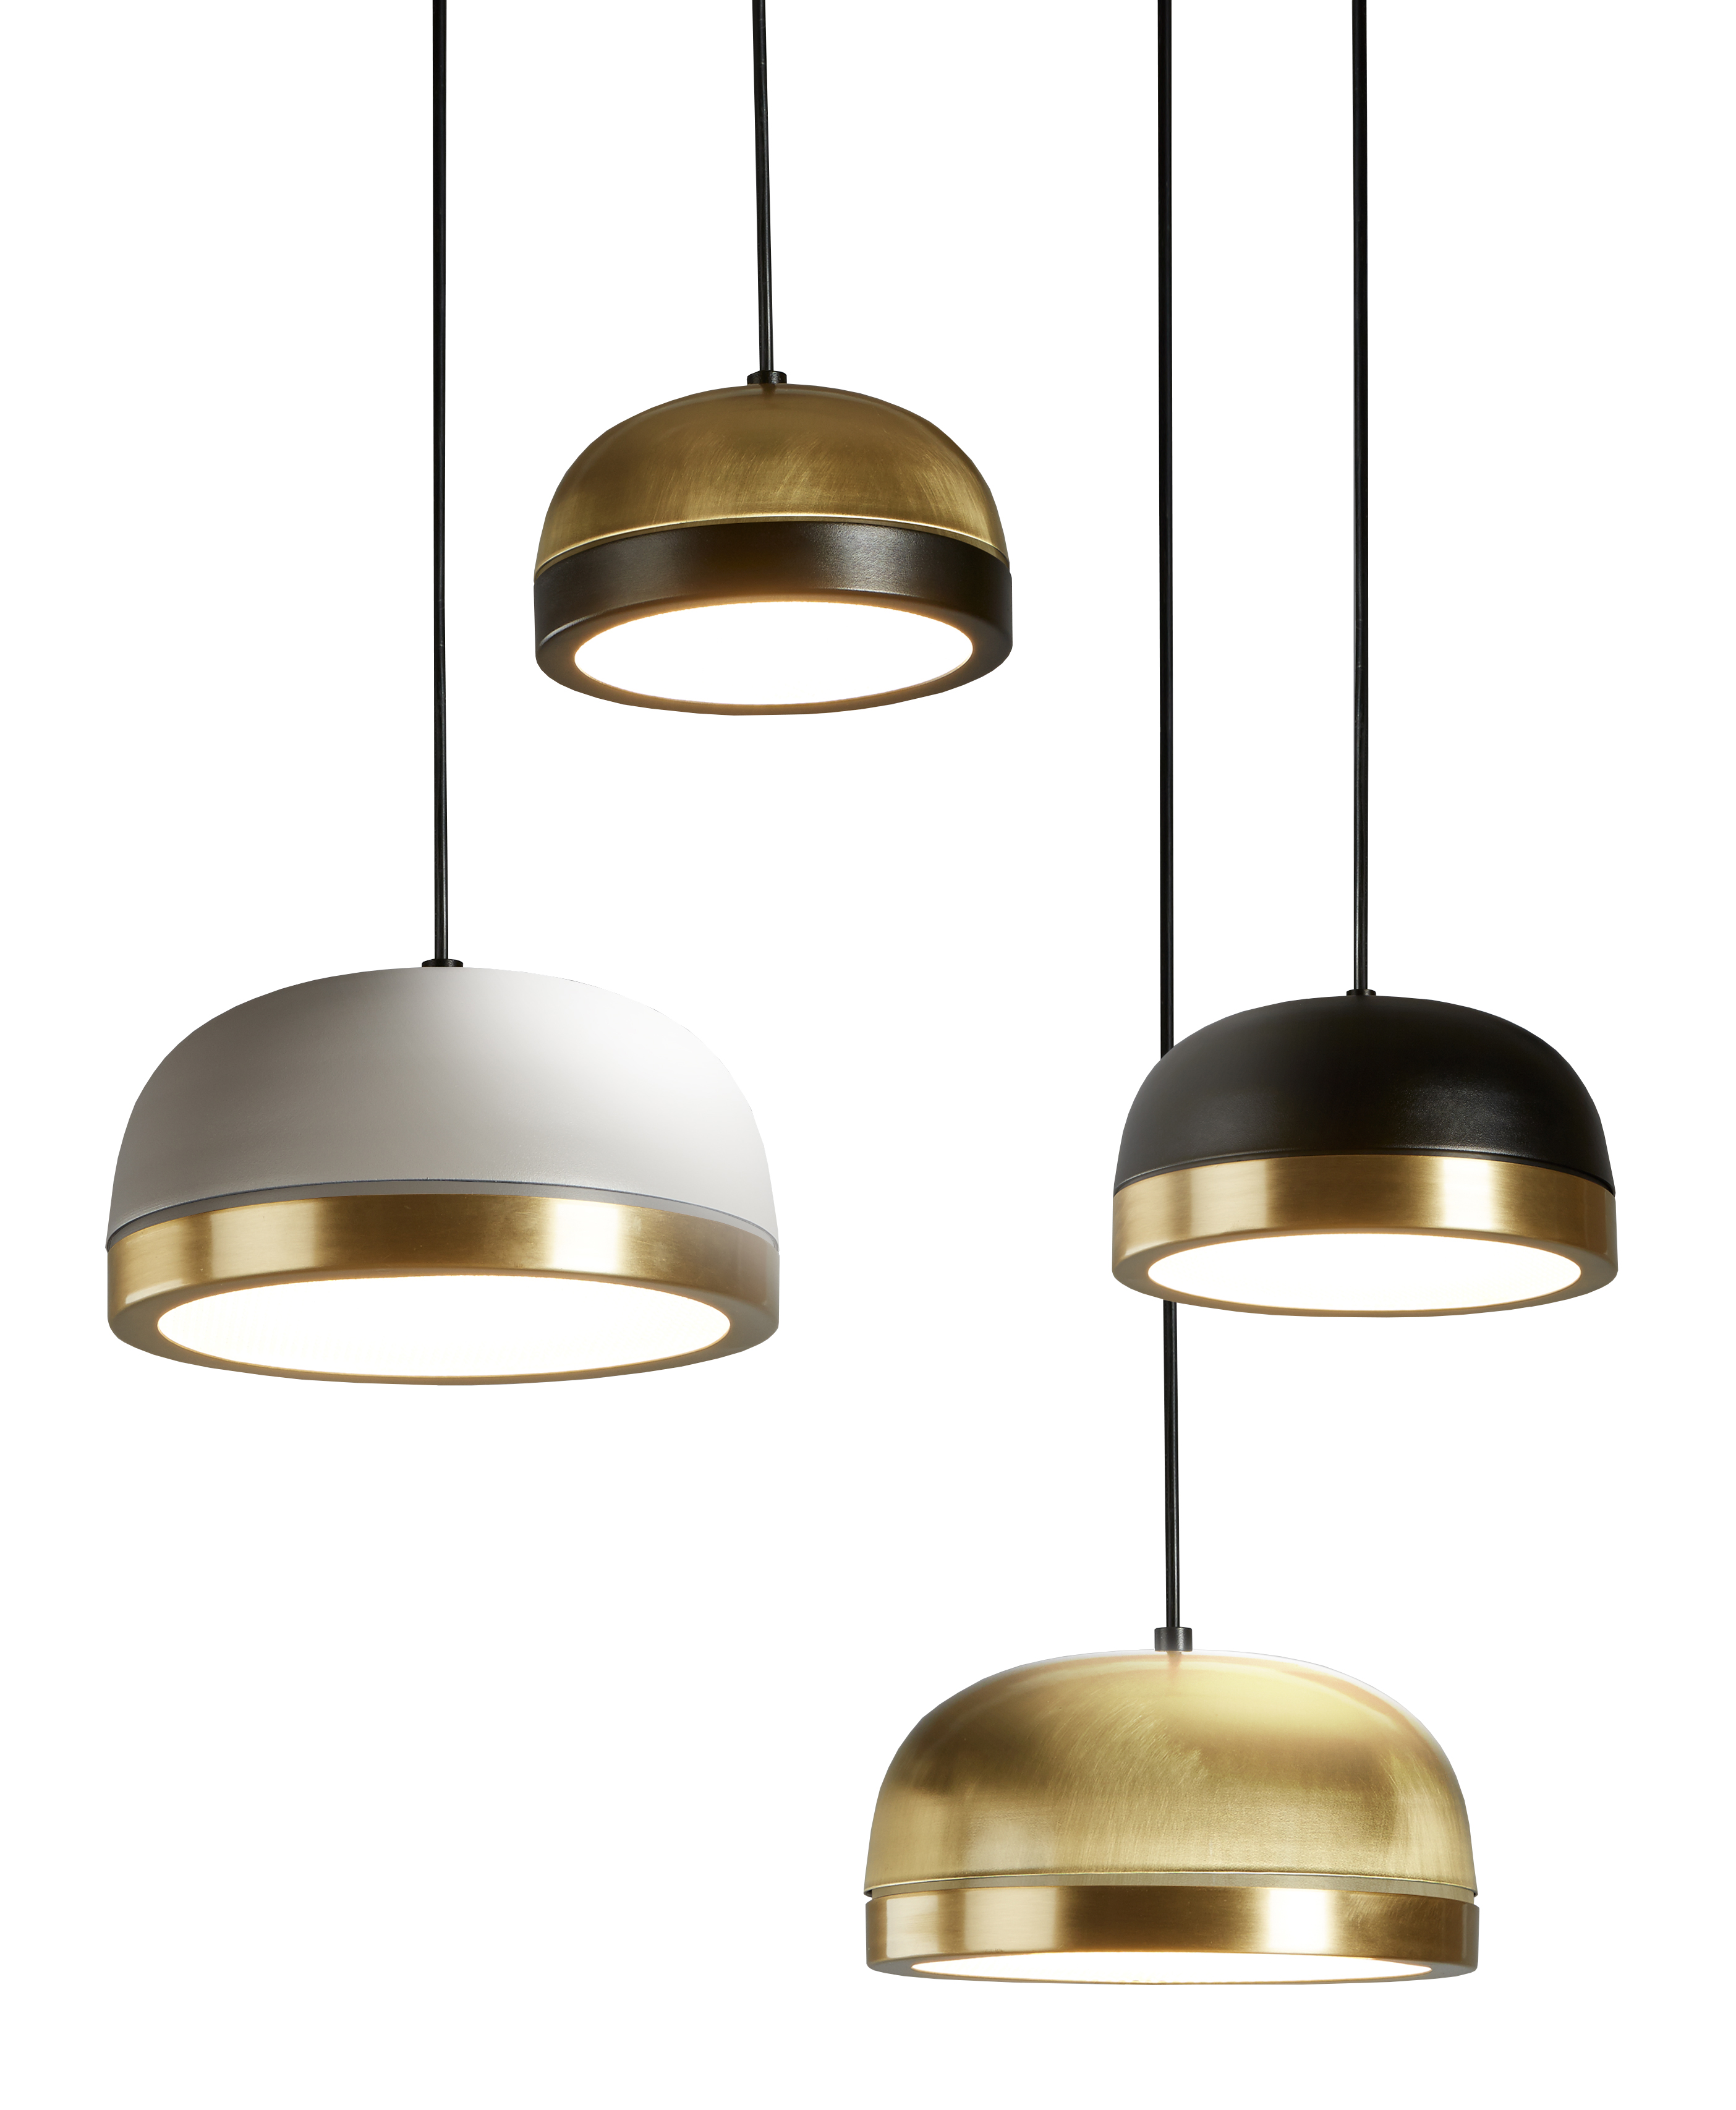 MOLLY from the innovative lighting collections of Oggetti.